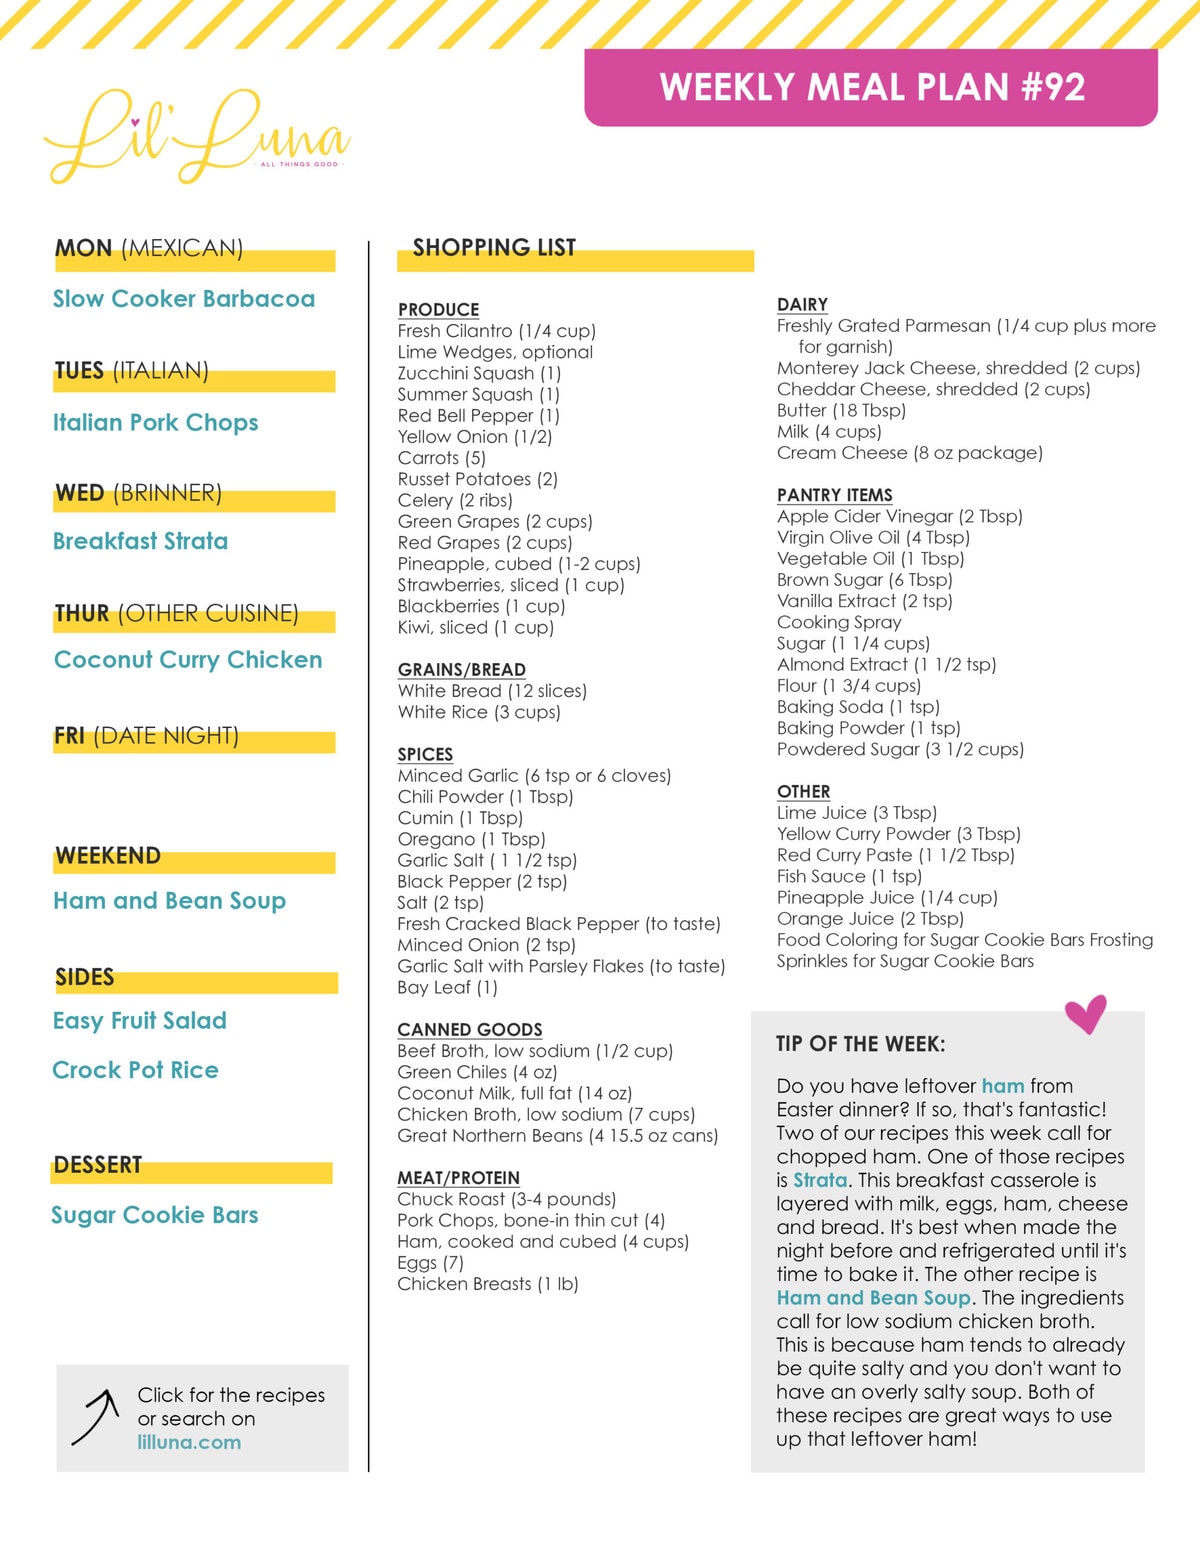 Printable version of Meal Plan #92 with grocery list.